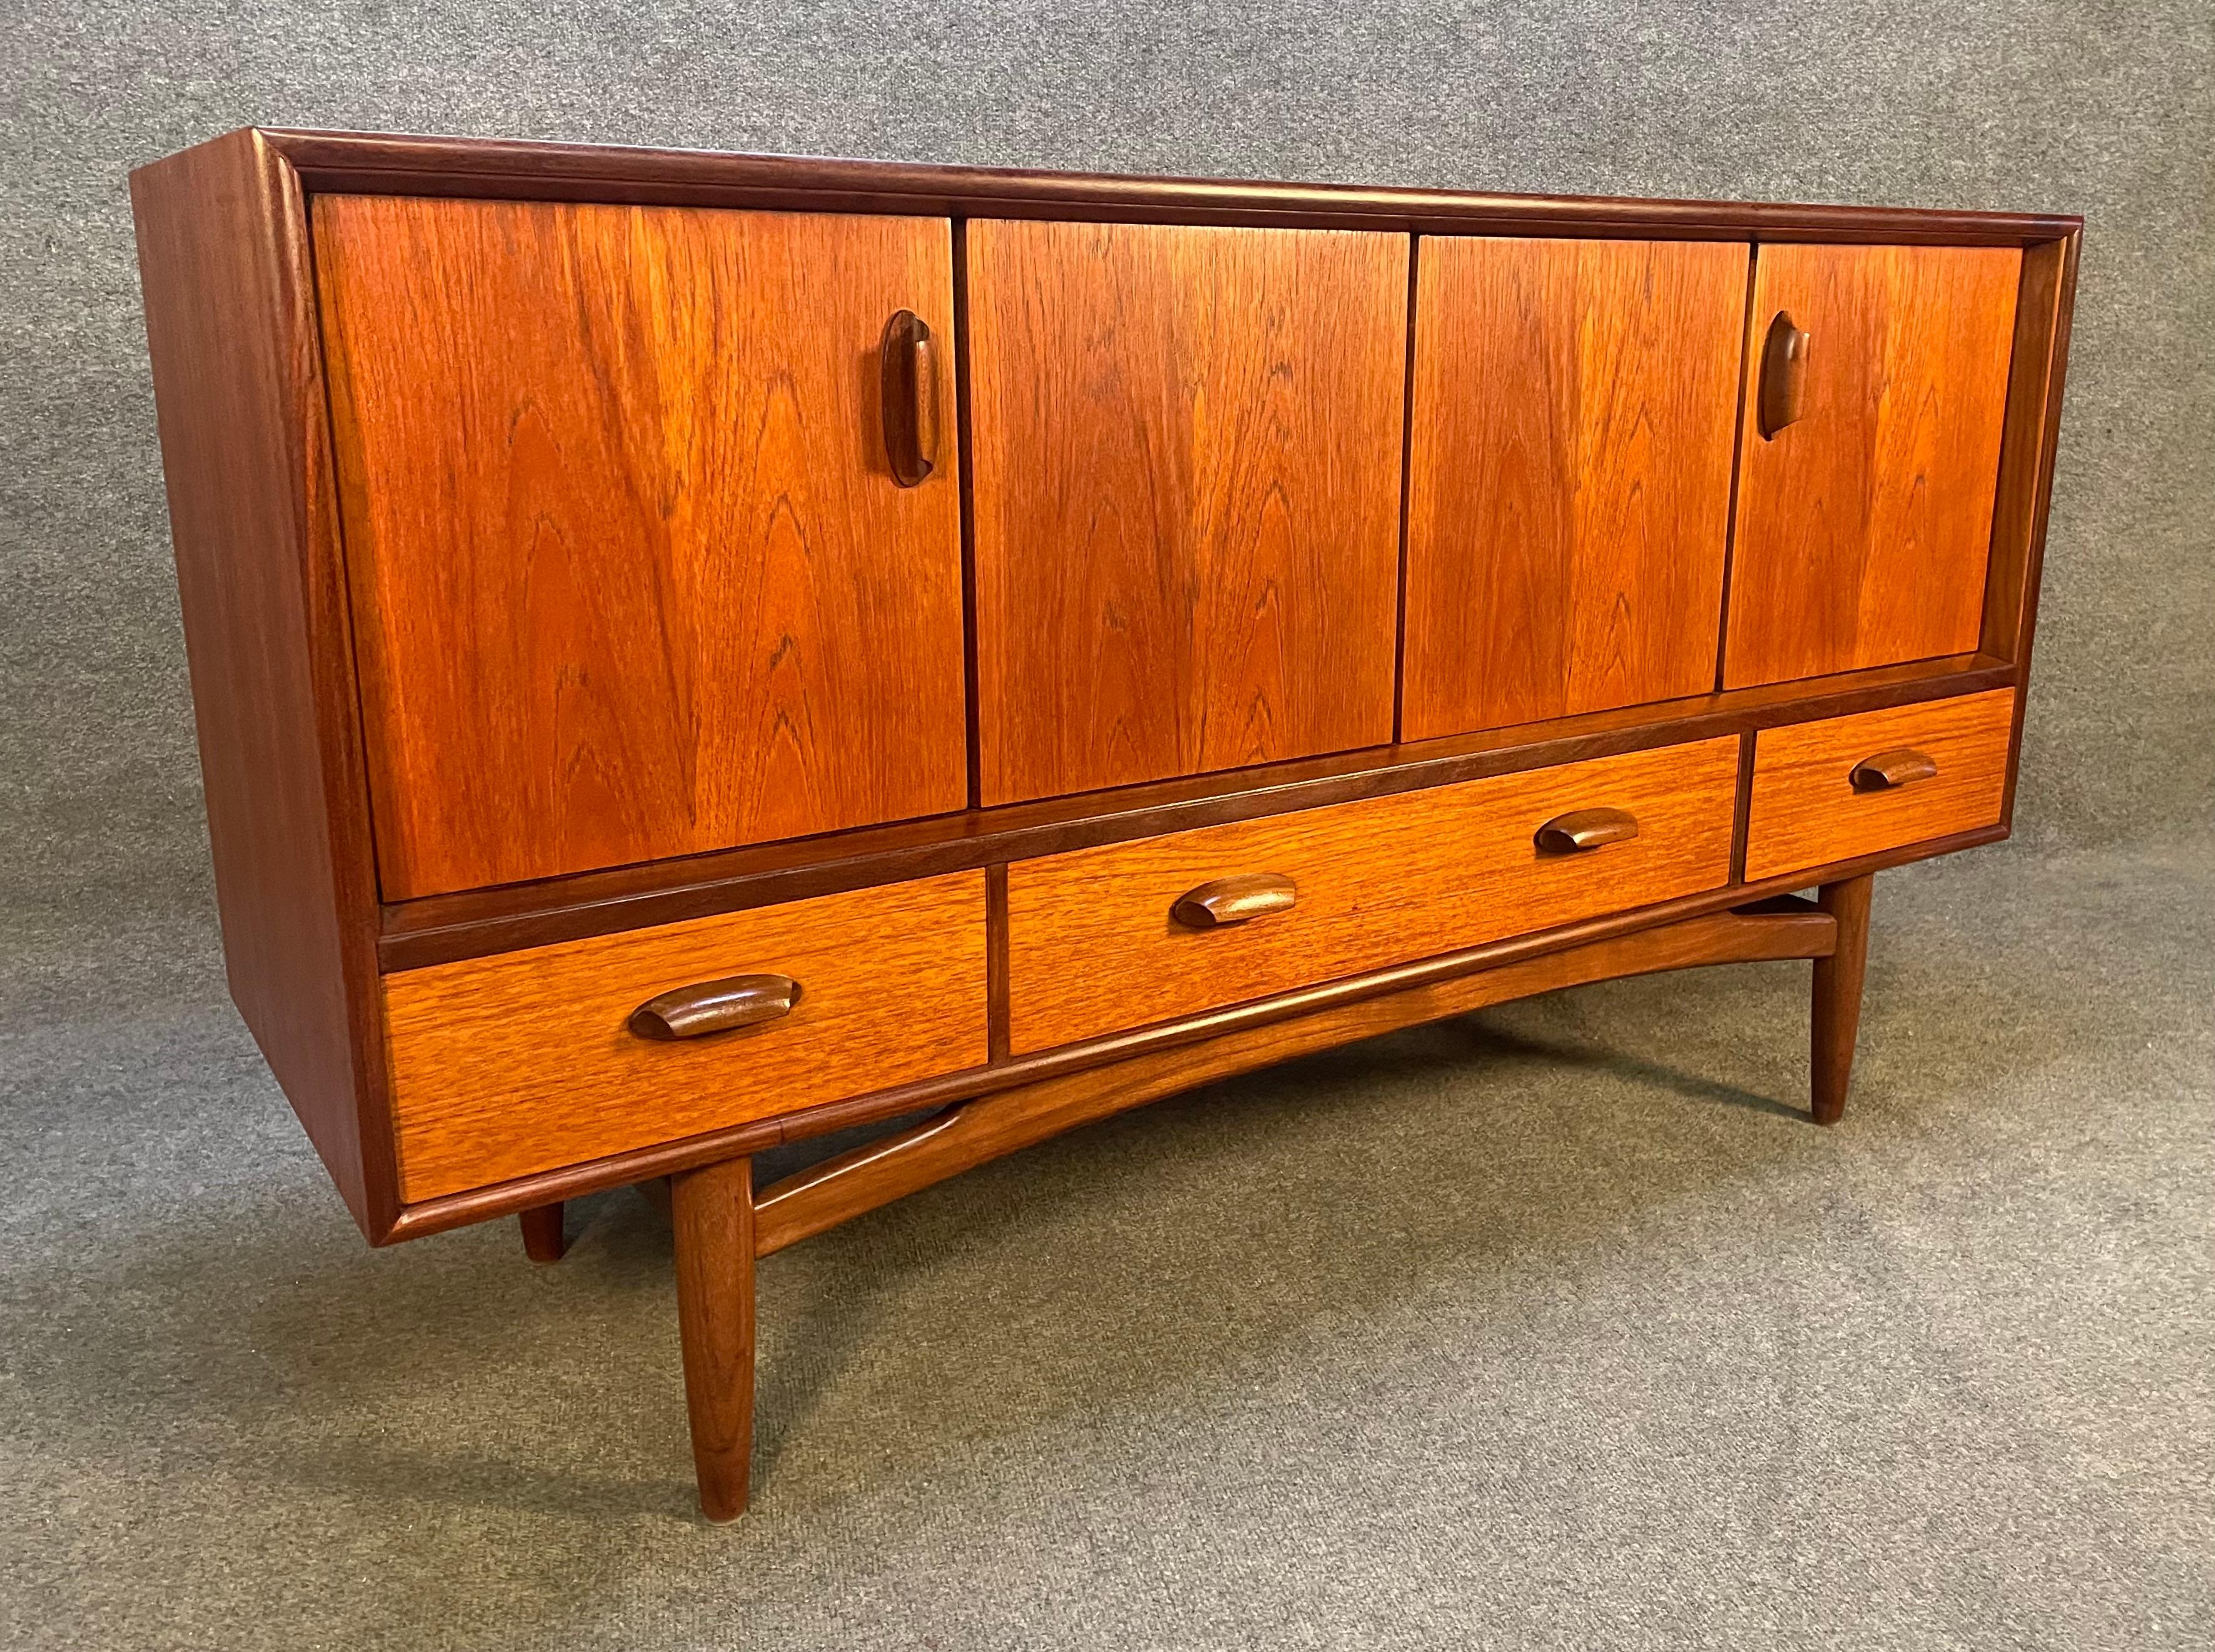 Here is a beautiful Scandinavian Modern credenza in teak manufactured by G Plan in England in the 1960s.
This rare credenza, recently imported from Europe to California before its refinishing, features a vibrant wood grain, 4 bi-fold doors with